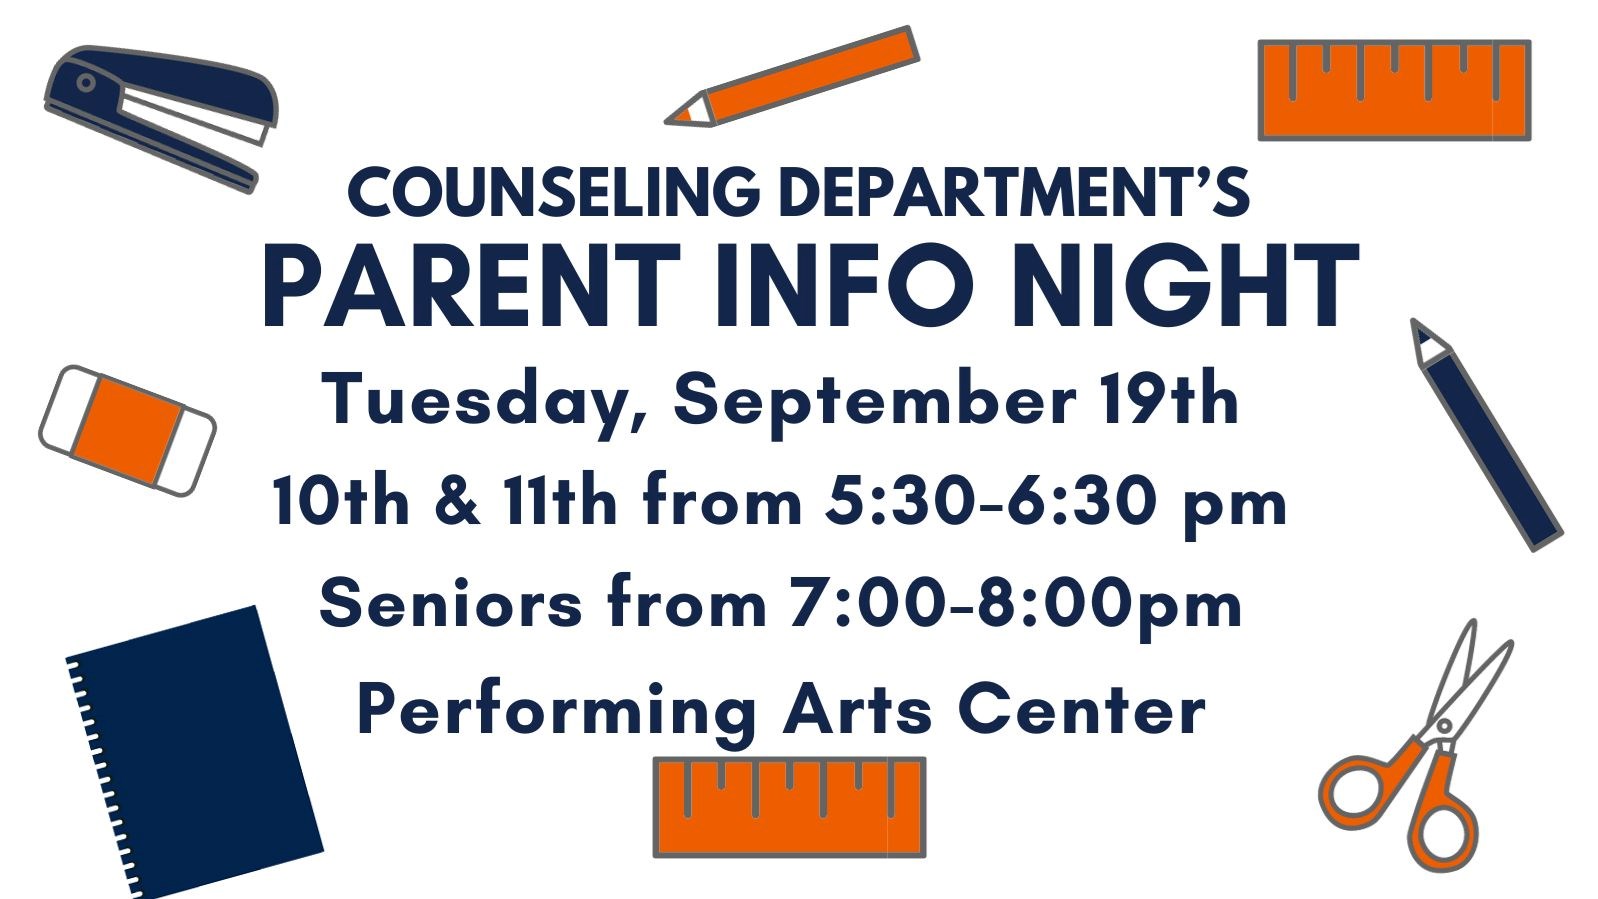 Counseling Department Parent Info Night